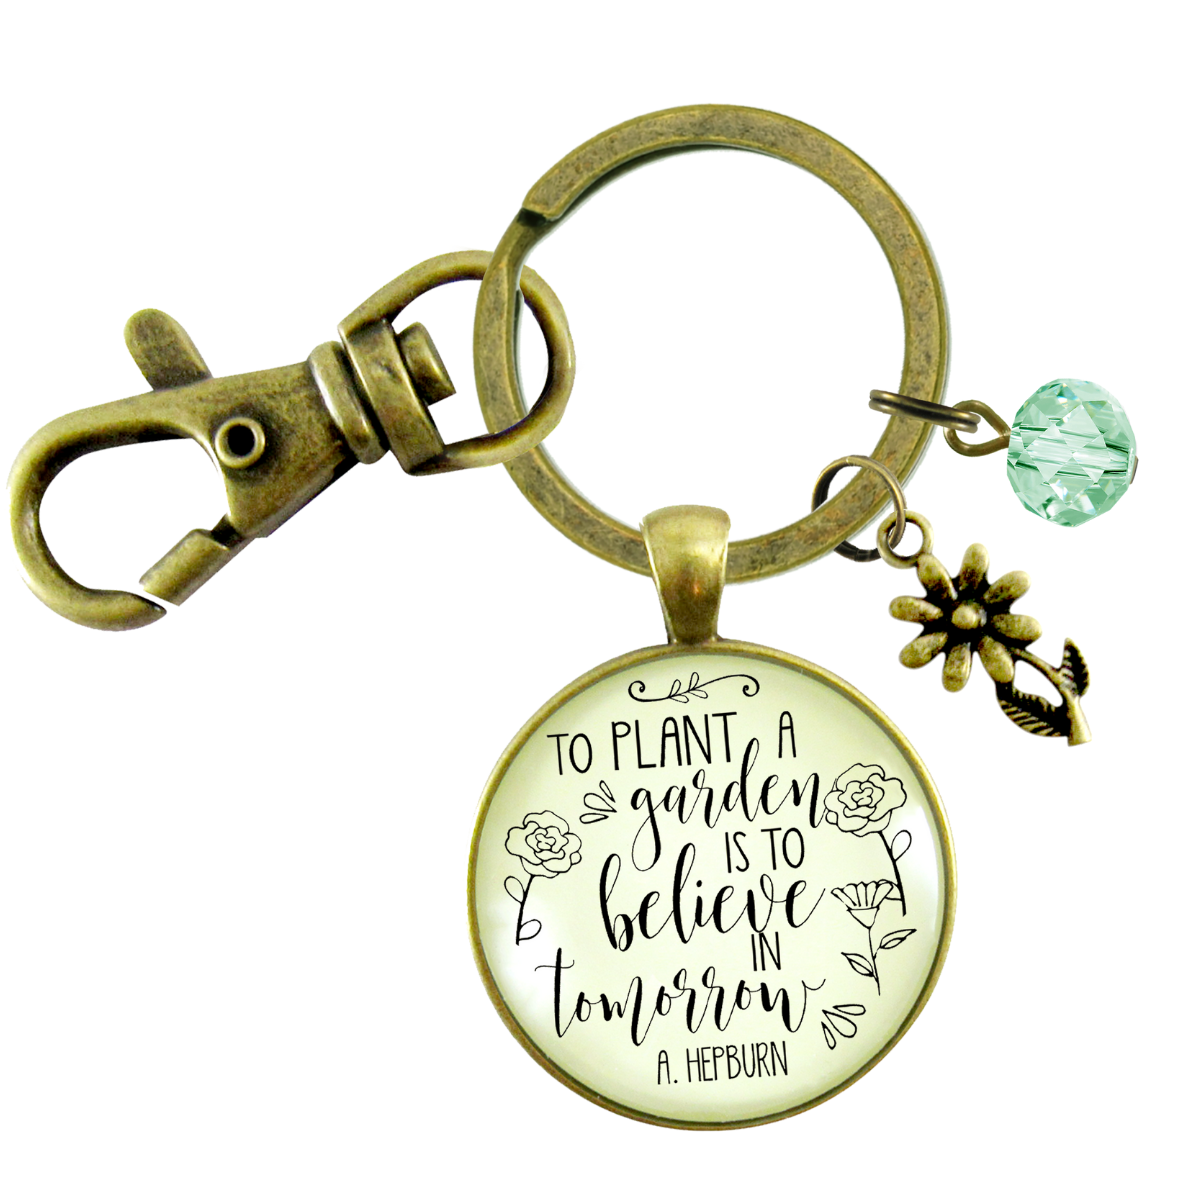 Love To Garden Keychain To Plant a Garden Believe in Tomorrow Quote Gift Jewelry - Gutsy Goodness Handmade Jewelry;Love To Garden Keychain To Plant A Garden Believe In Tomorrow Quote Gift Jewelry - Gutsy Goodness Handmade Jewelry Gifts